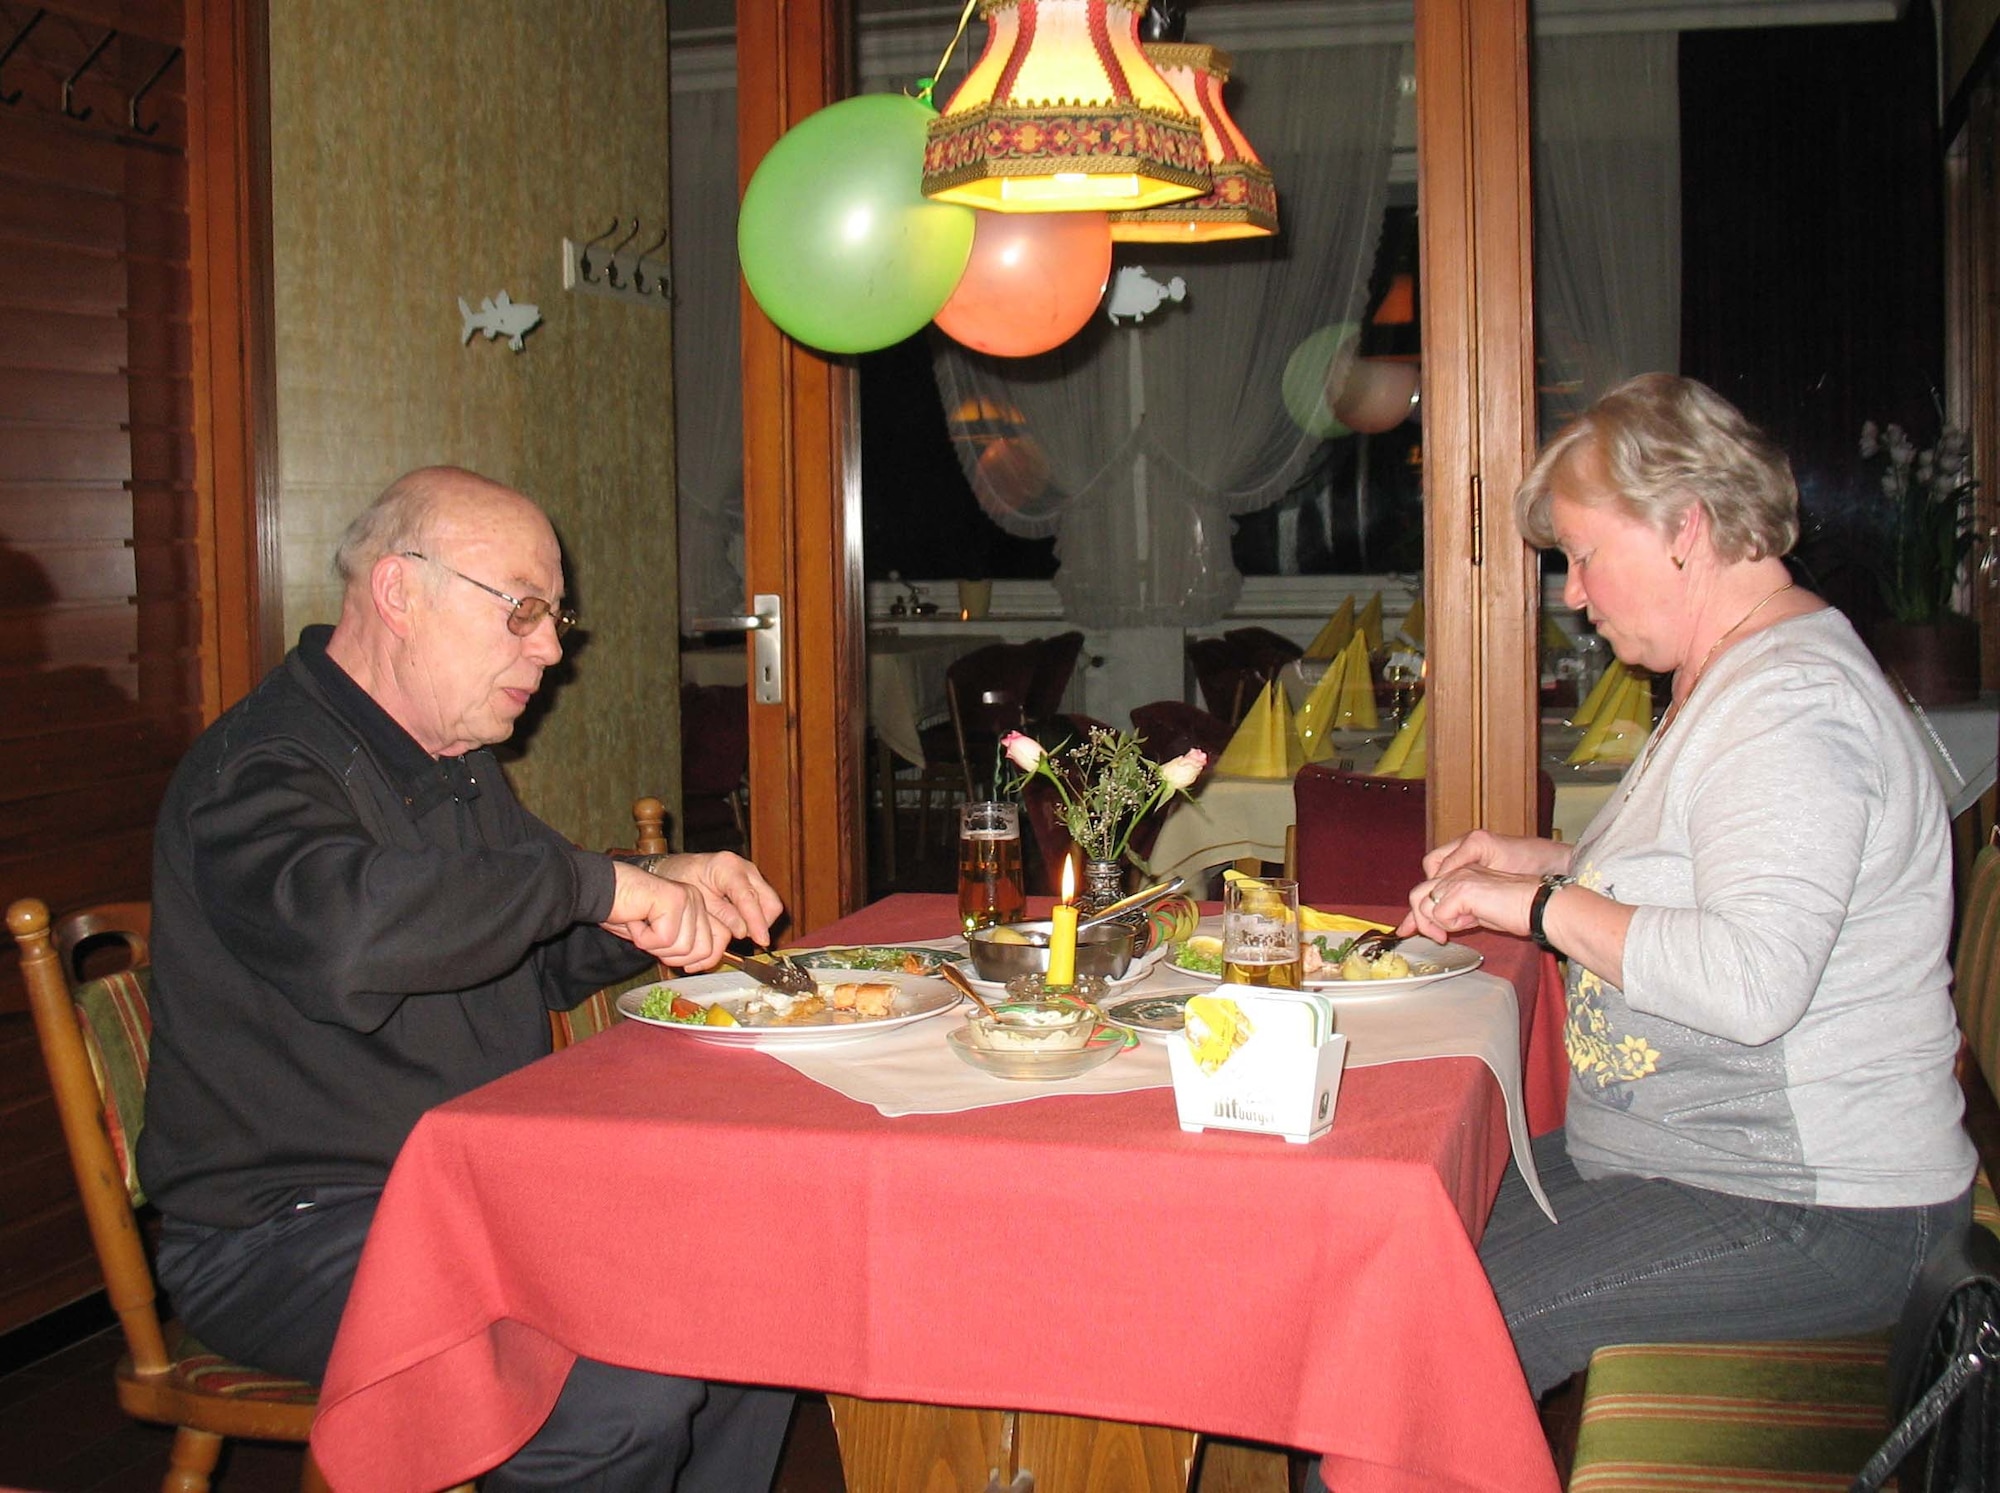 SPANGDAHLEM, Germany – On Ash Wednesday and the beginning of Lent, many local residents like this couple from Binsfeld, Germany, traditionally eat out at a restaurant, eating Herring or other fish meals. Many faithful Catholics still adhere to certain restrictions during the 40 days of Lent between Ash Wednesday and Easter Sunday while others refrain from sweets, alcohol, meat, eggs or milk. Fish is one meal always permitted as Lenten fare. (U.S. Air Force photo/Iris Reiff)